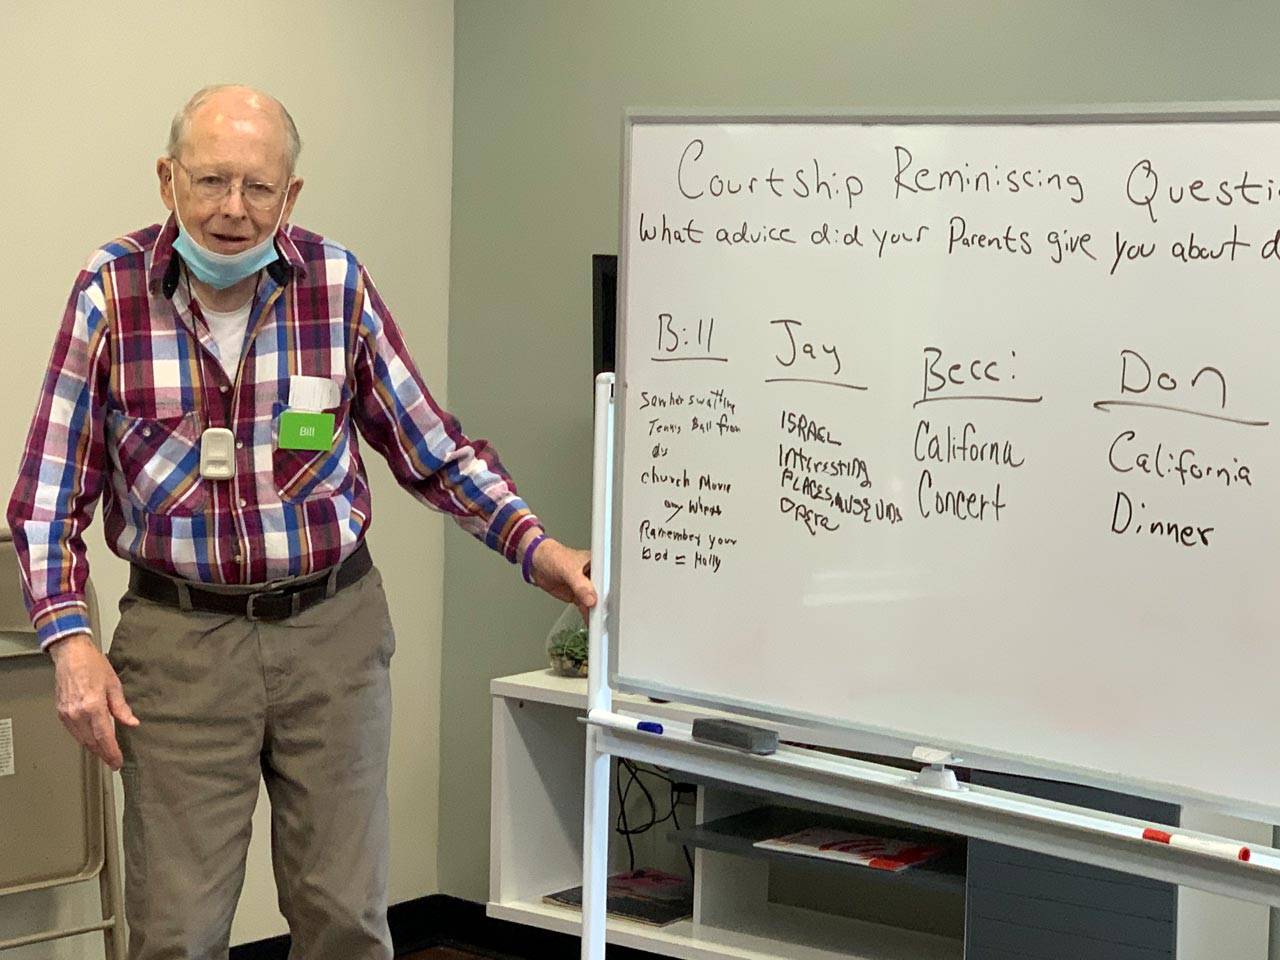 Renew dementia daycare member Bill stands in front of white board during an activity with courtship reminiscing questions